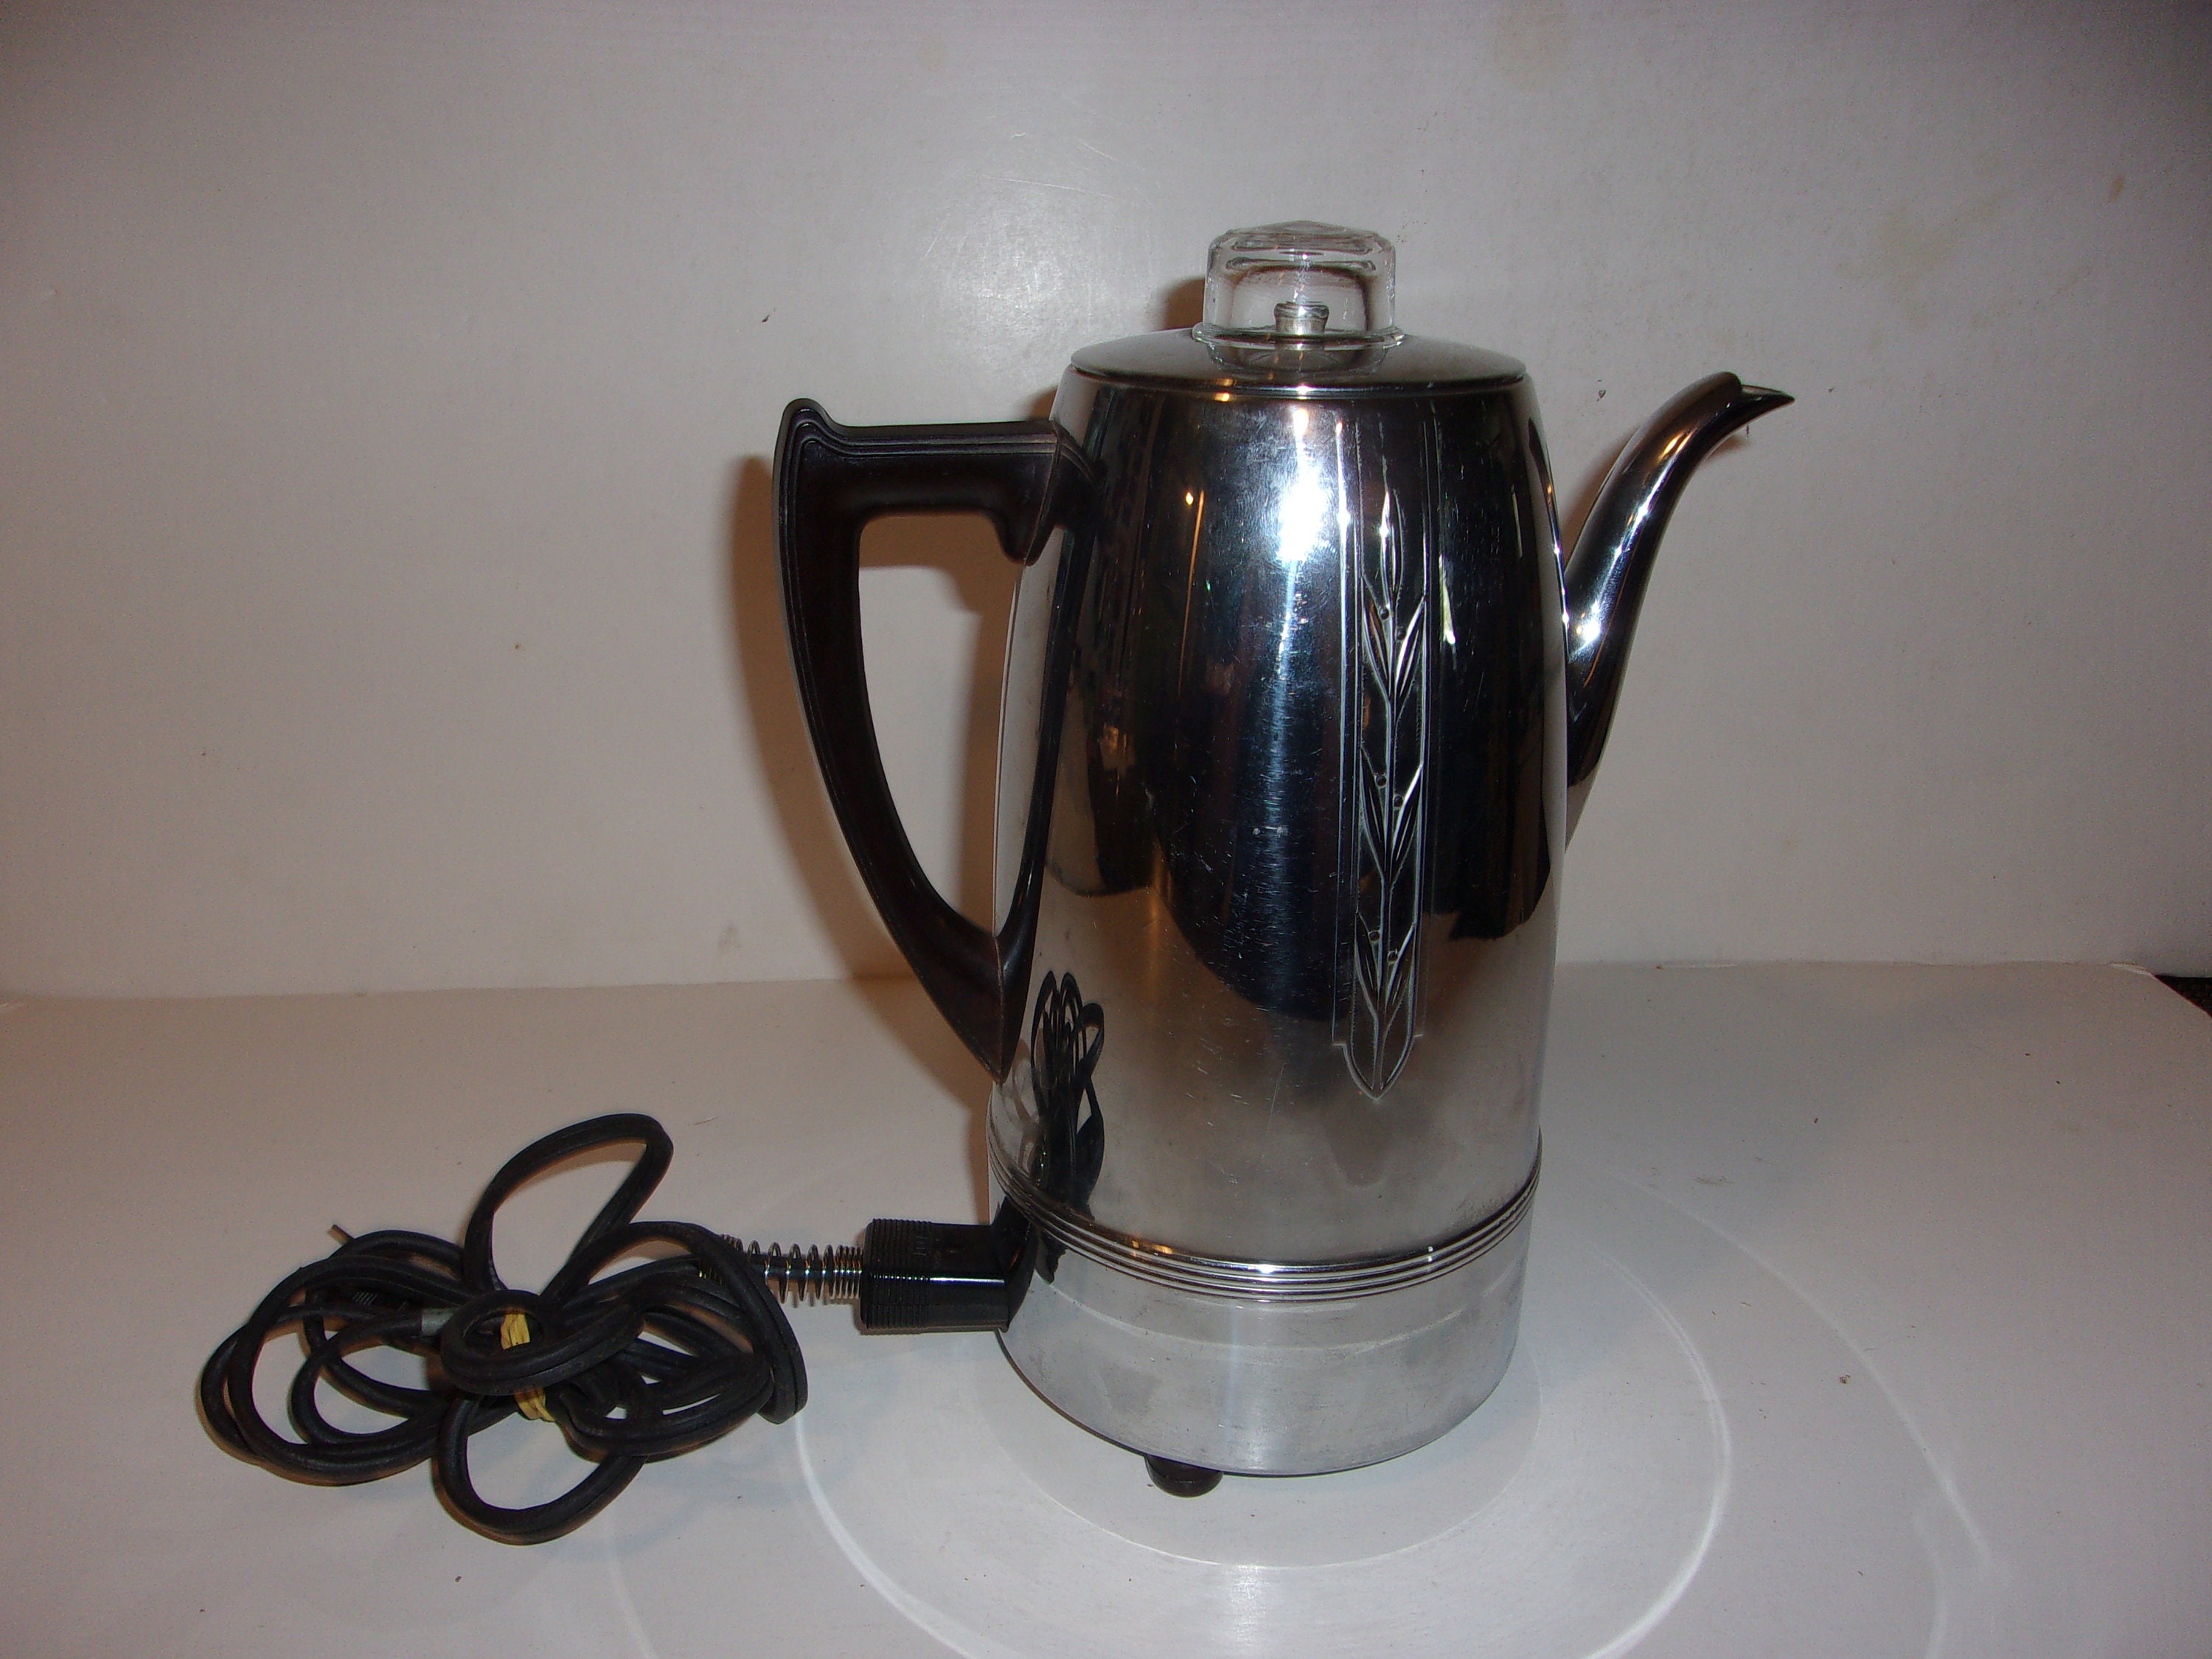 I bought this 1950s electric percolator for $2 at a garage sale. I